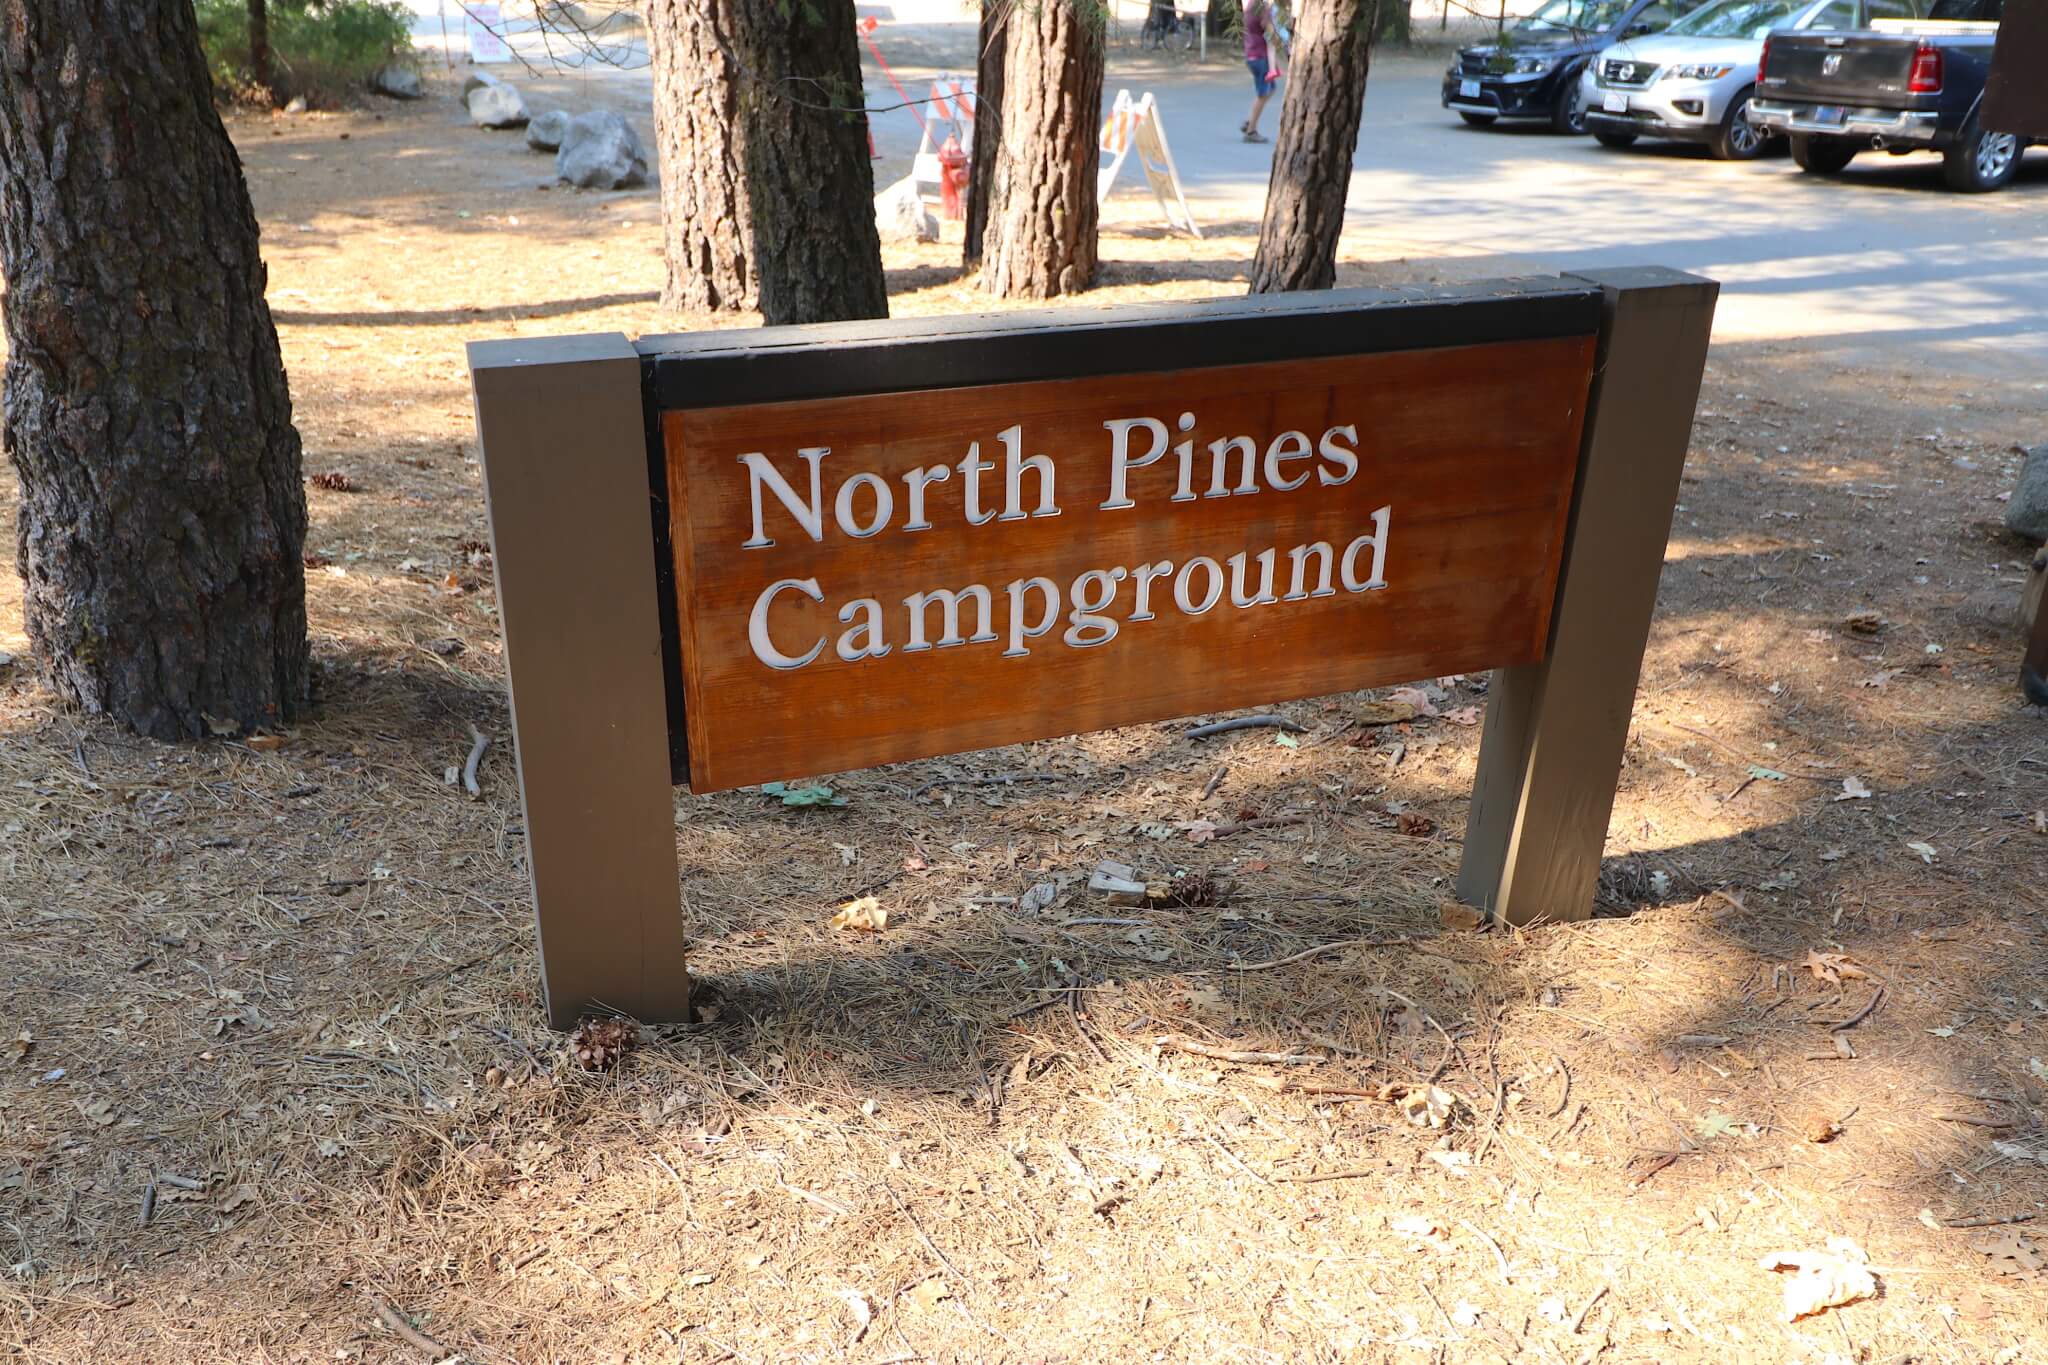 North Pines Early Access Lottery-North Pines Sign